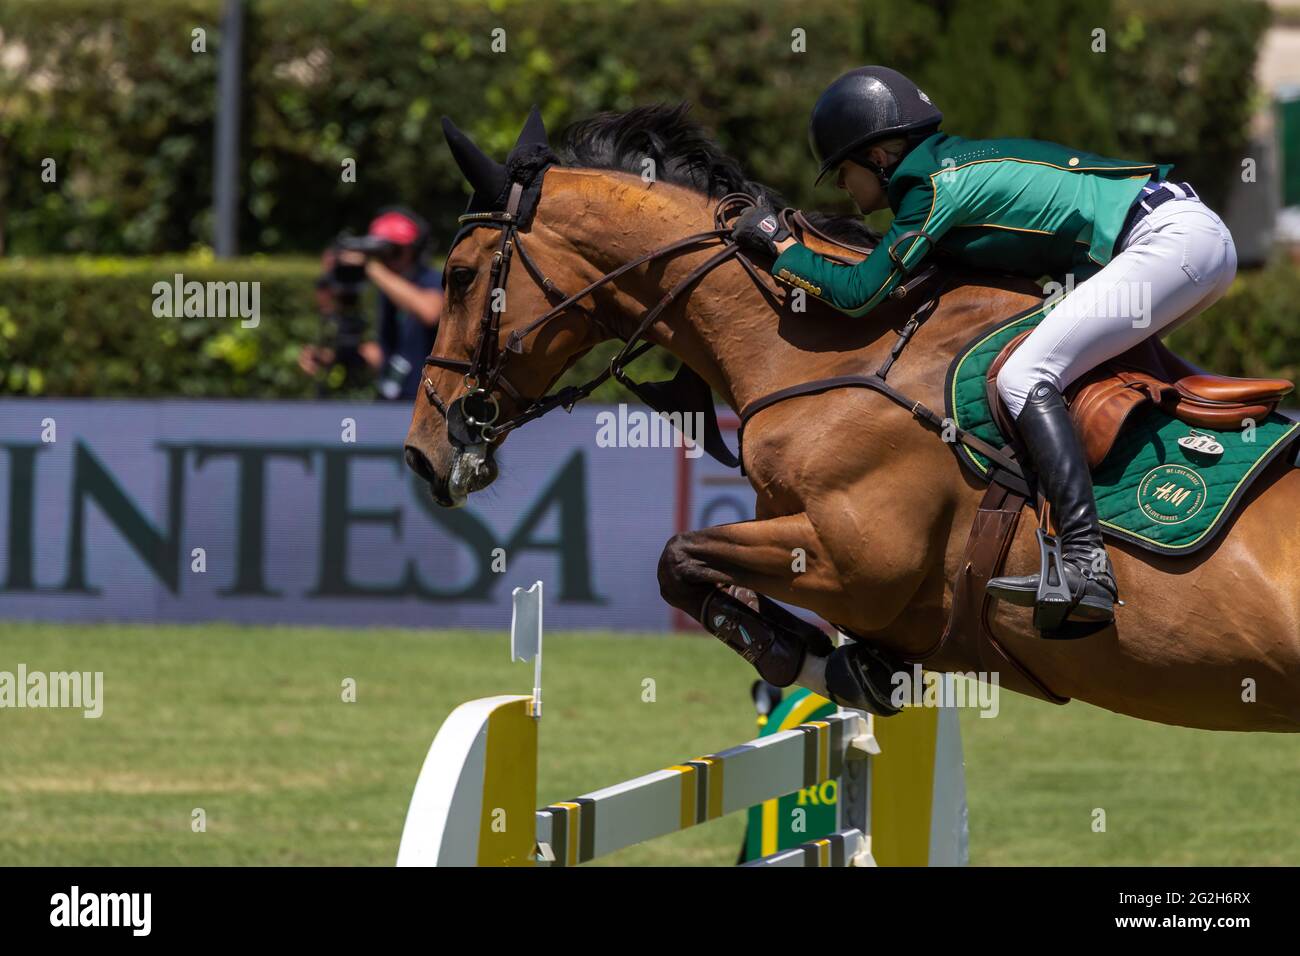 Rome, Italy. 30th May, 2021. Malin Baryard-Johnsson (SWE) ride H&M INDIANA  during the Rolex Grand Prix Rome at 88th CSIO 5° Master D'Inzeo at Piazza  di Siena on May 30, 2021 in